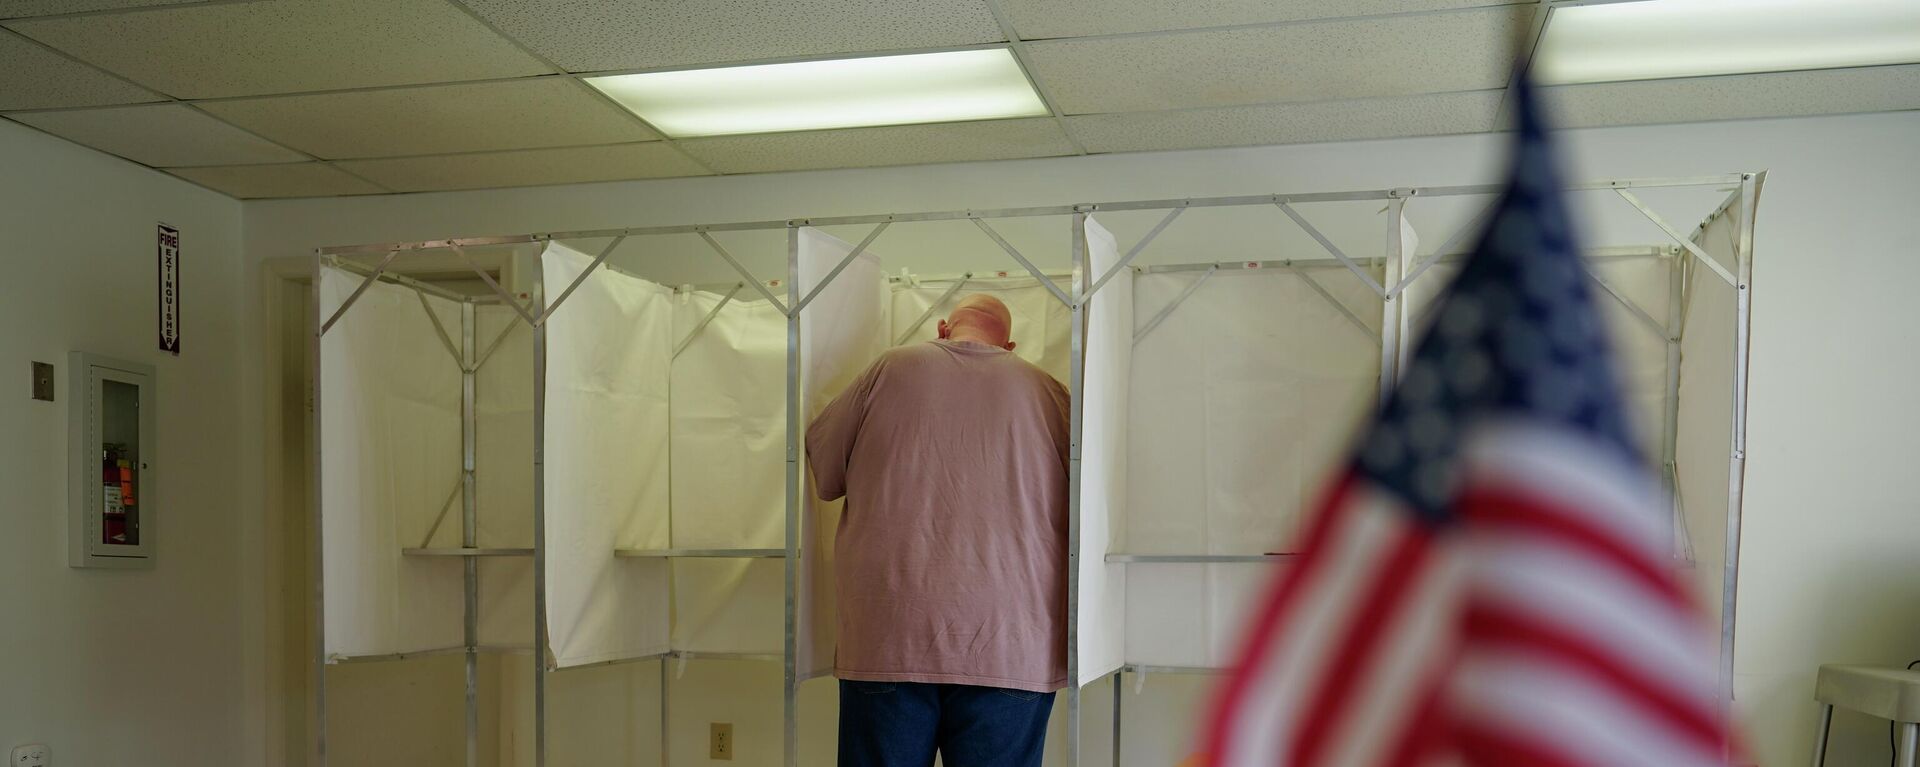 FILE - A voter fills out a ballot during the Pennsylvania primary election at the Michaux Manor Living Center in Fayetteville, Pa., May 17, 2022. As the 2022 midterm elections enter their final two-month sprint, leading Republicans concede that their party's advantage may be slipping even as Democrats confront their president's weak standing, deep voter pessimism and the weight of history this fall. - Sputnik International, 1920, 04.02.2024